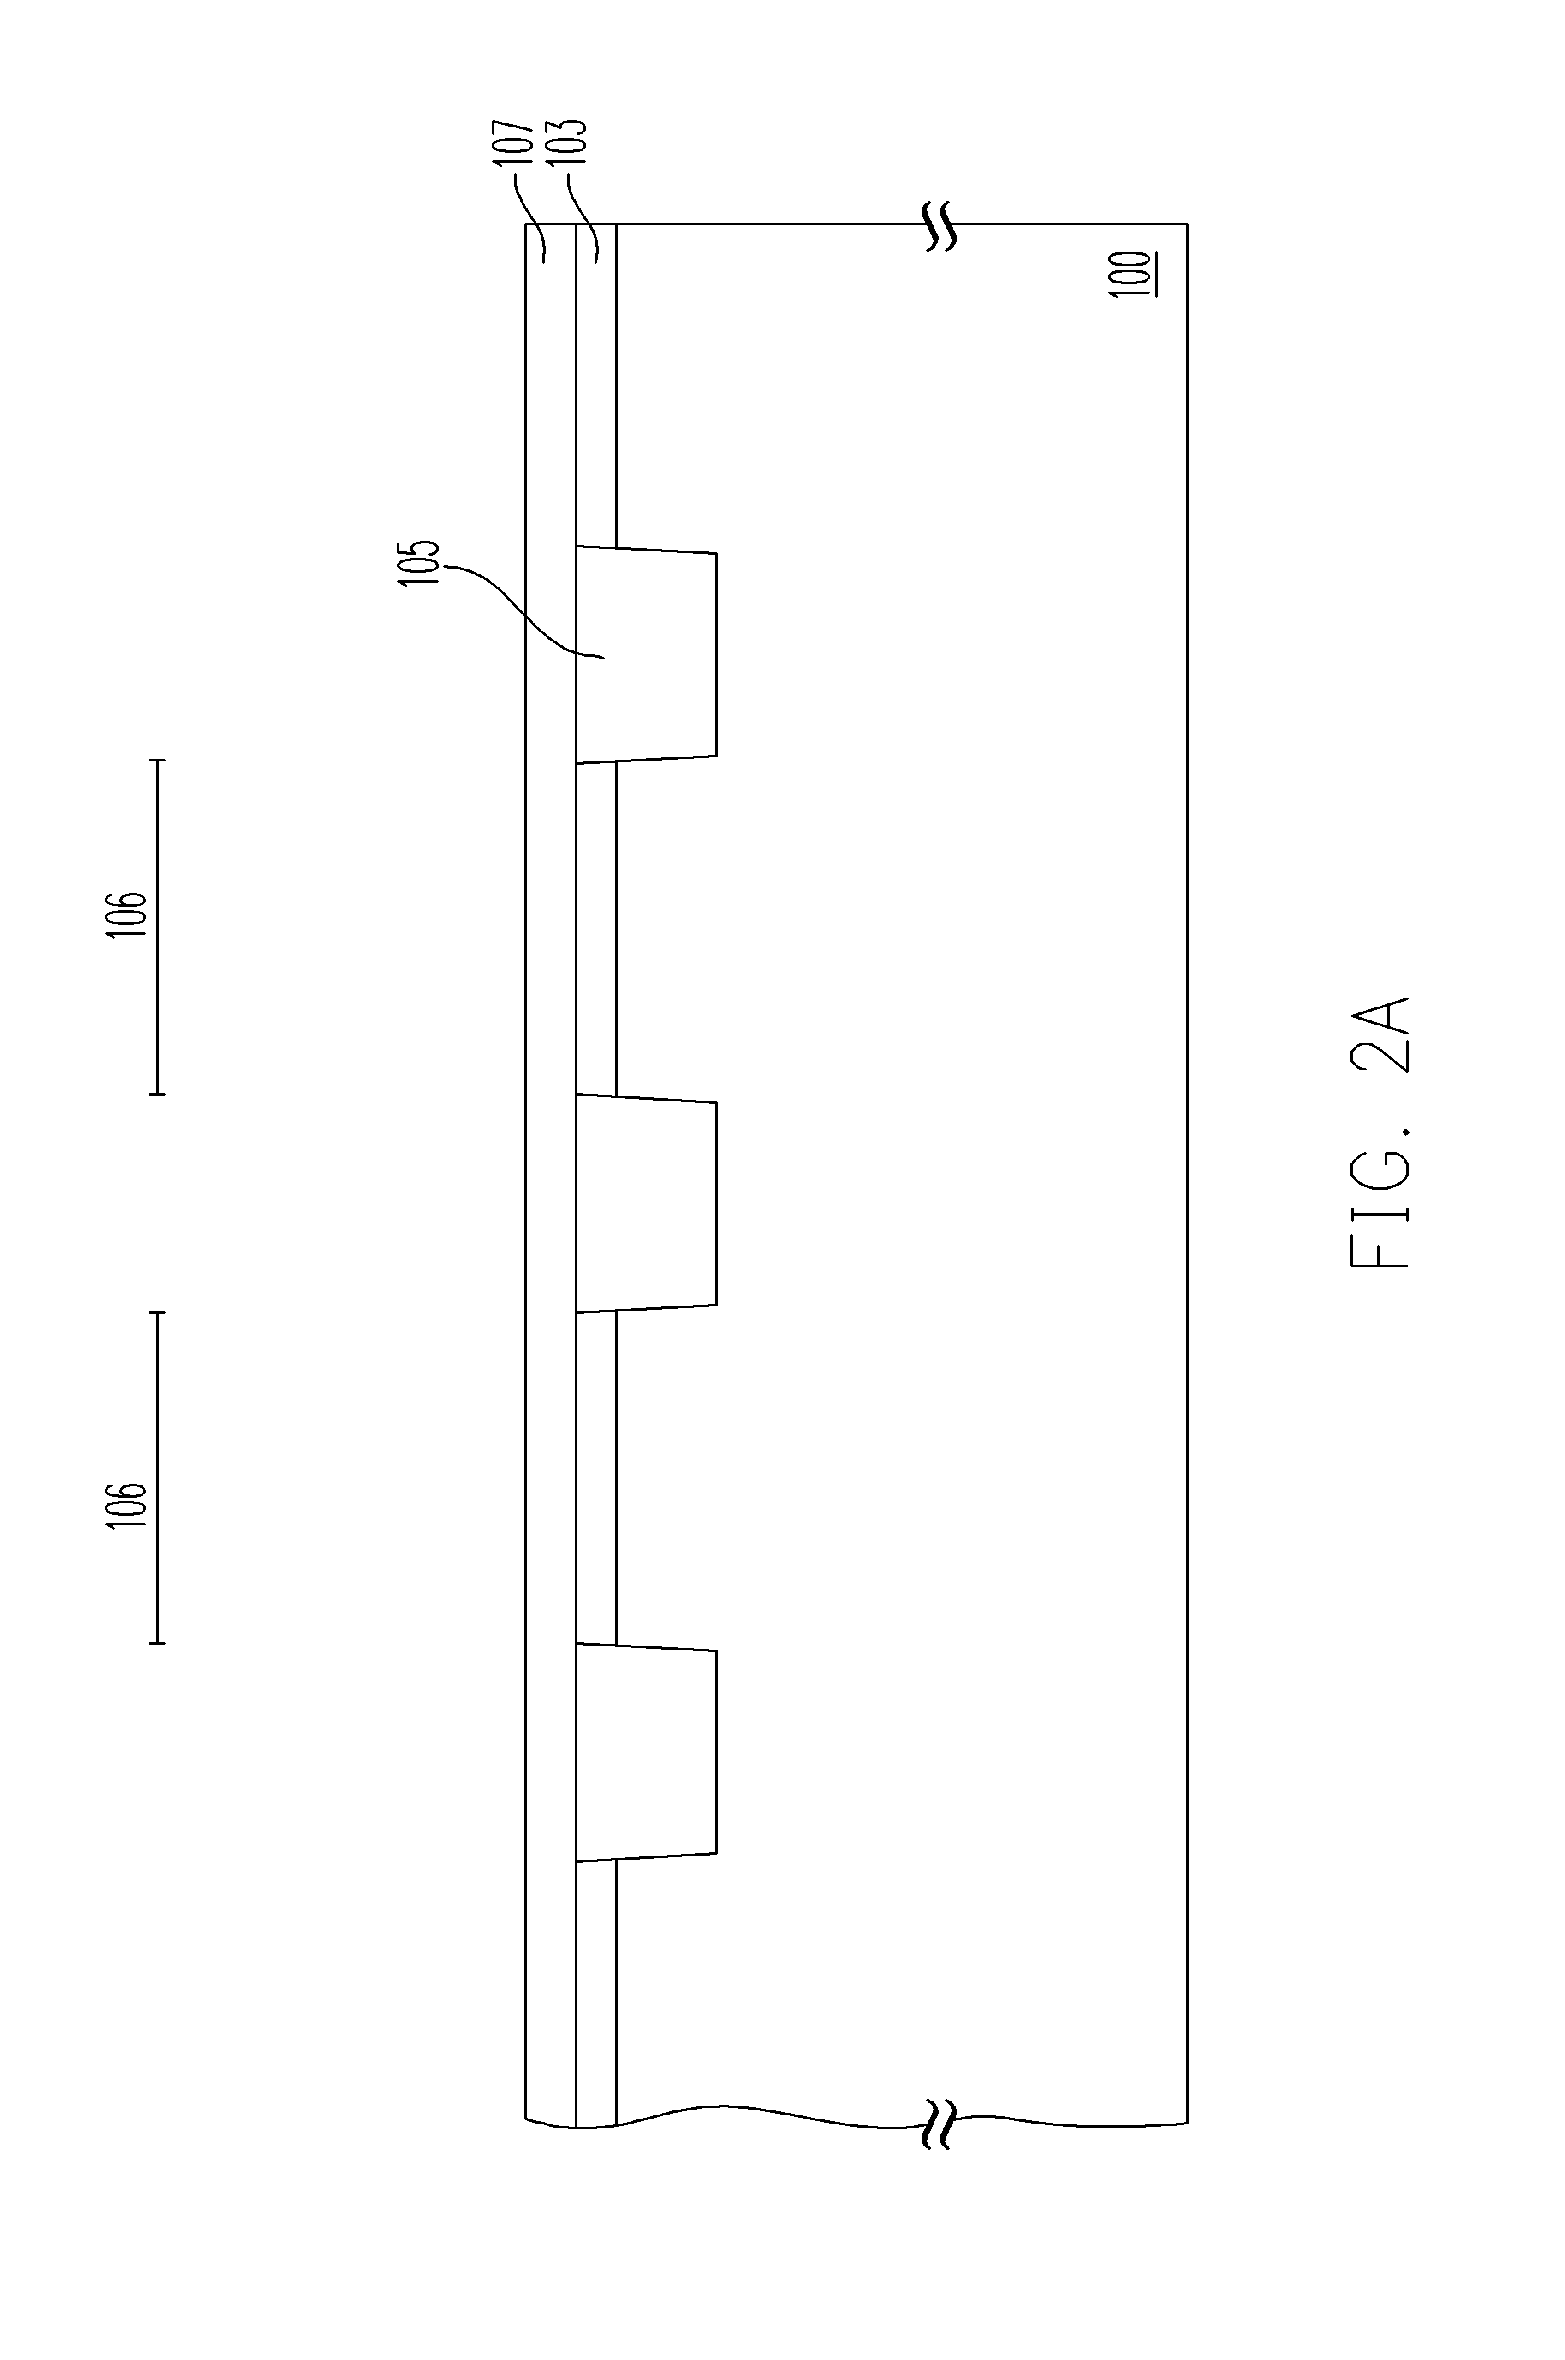 Pick-up structure for dram capacitors and dram process